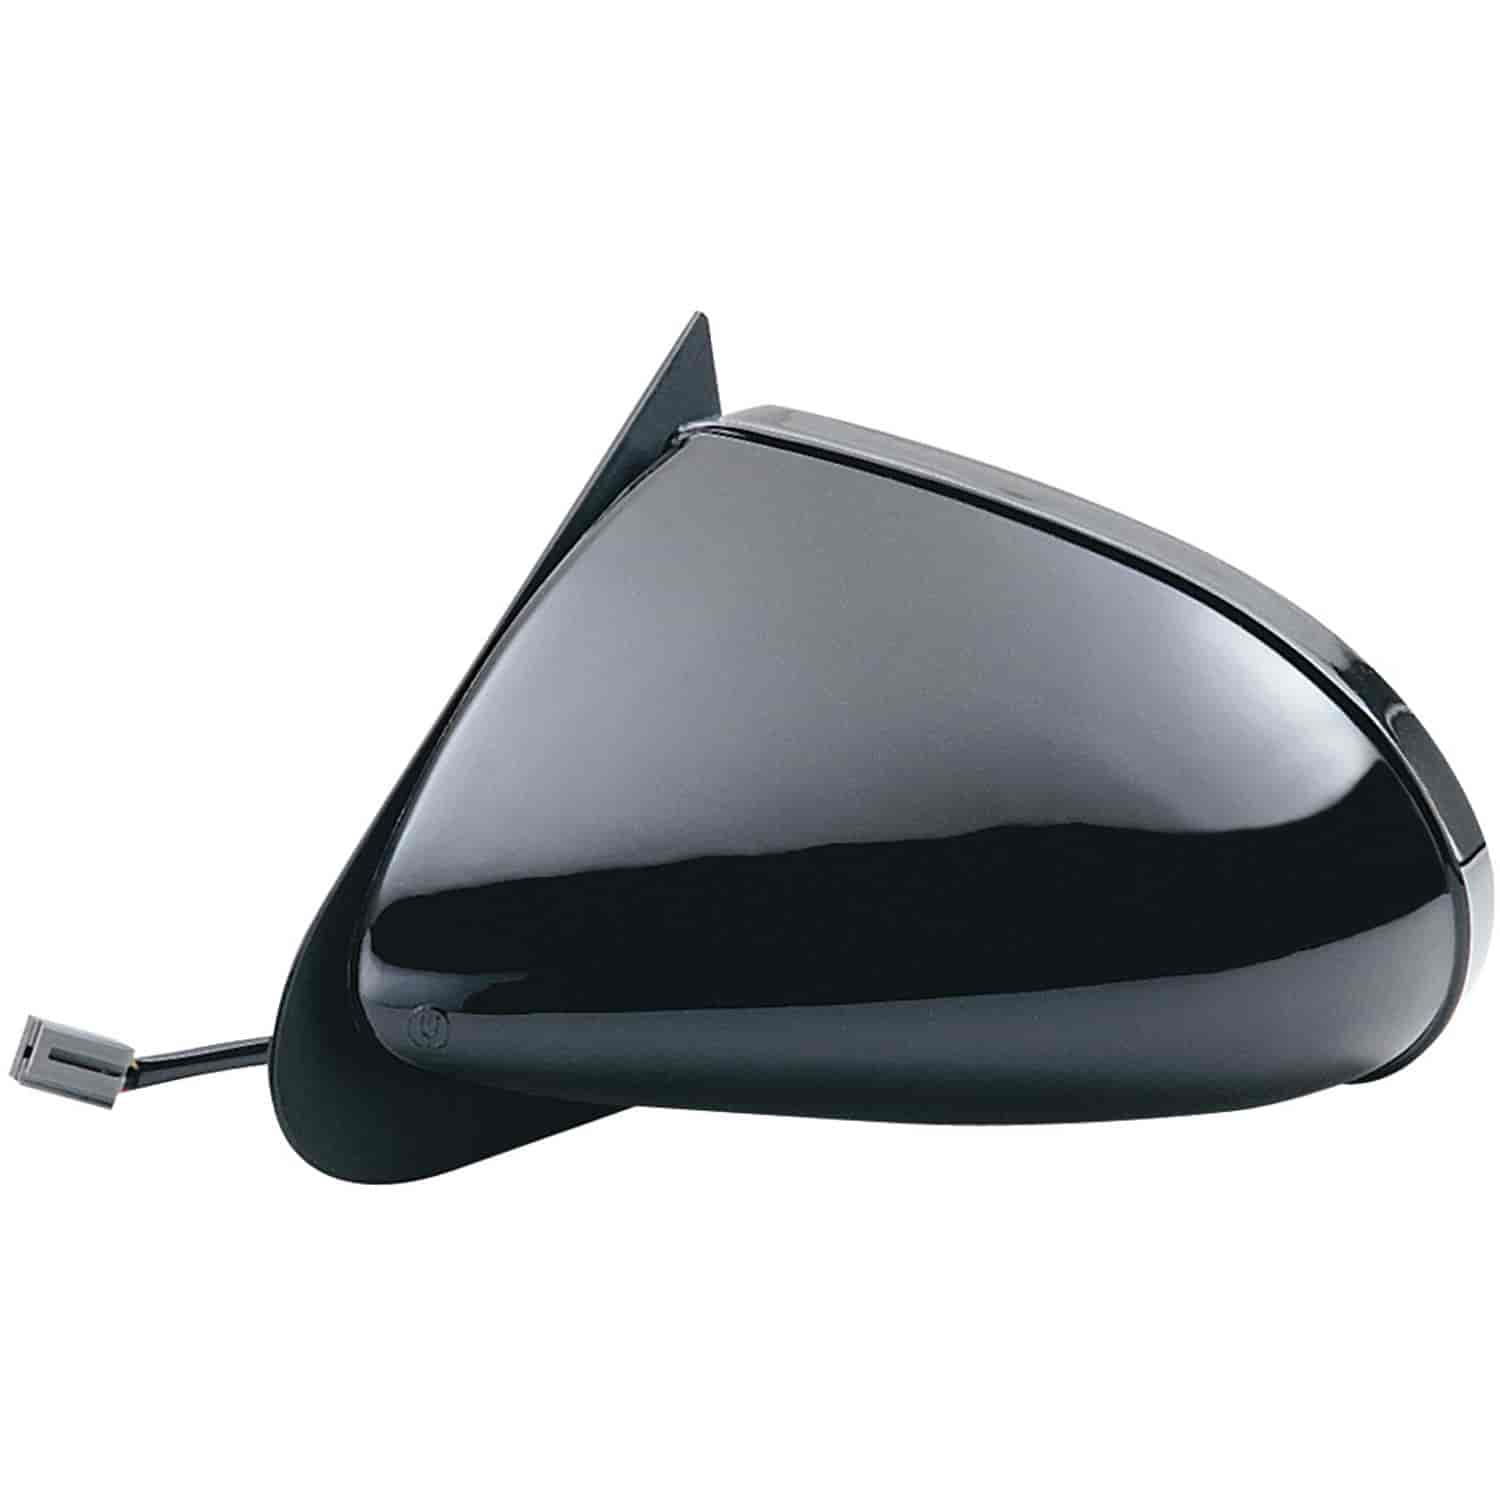 OEM Style Replacement mirror for 89-97 Ford Thunderbird Mercury Cougar XR7 driver side mirror tested